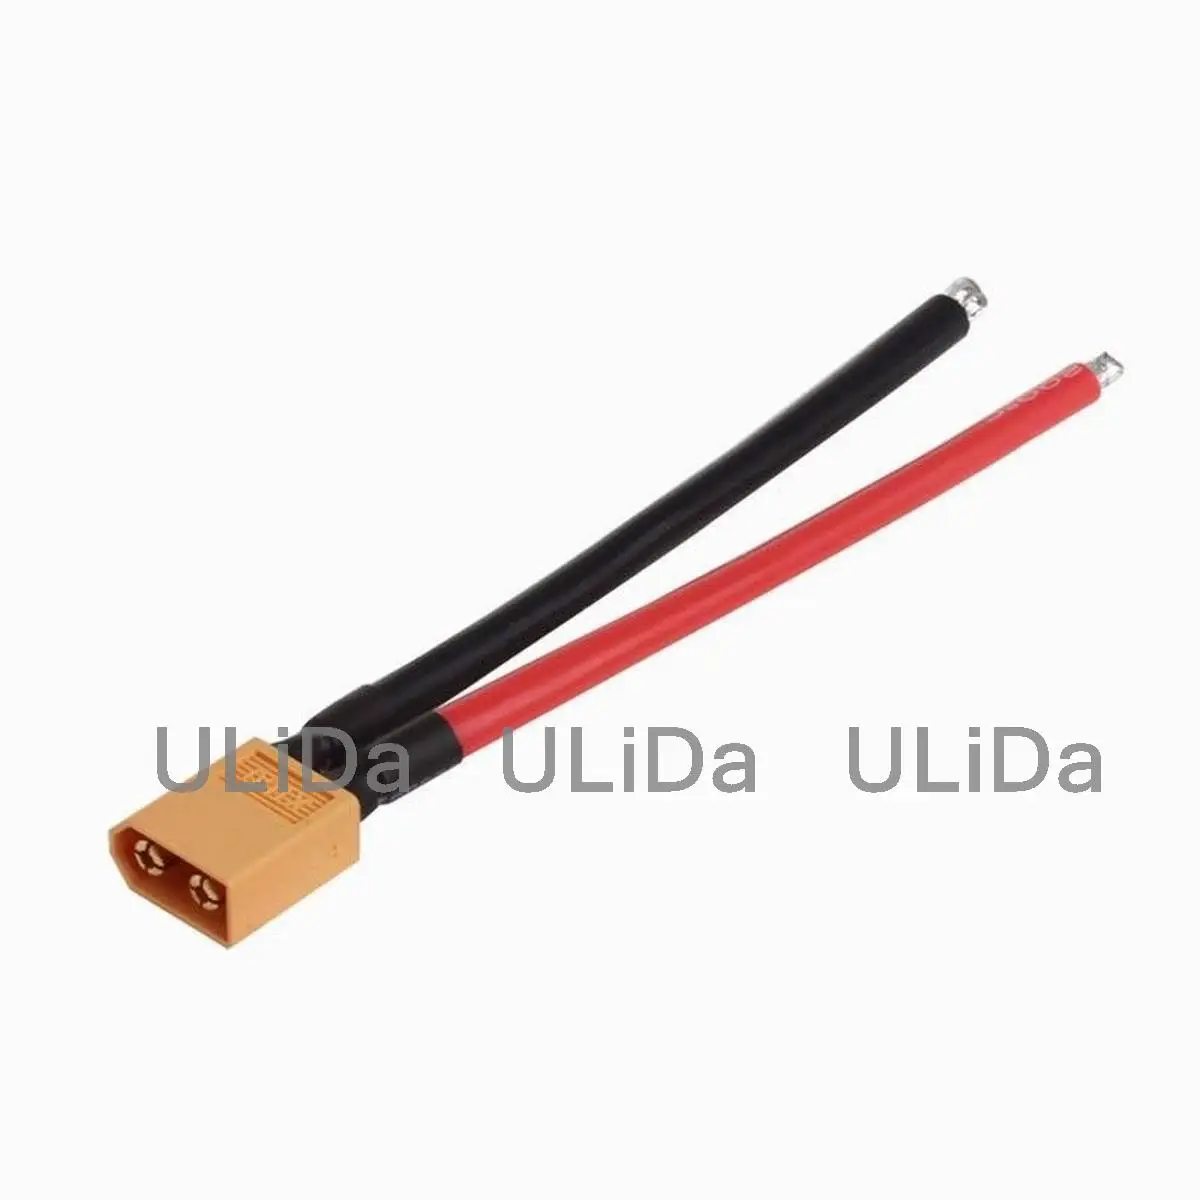 

XT60 Male Connector 10CM Silicone Wire 12AWG Cable for RC Lipo Battery Quadcopter Multirotor Drone